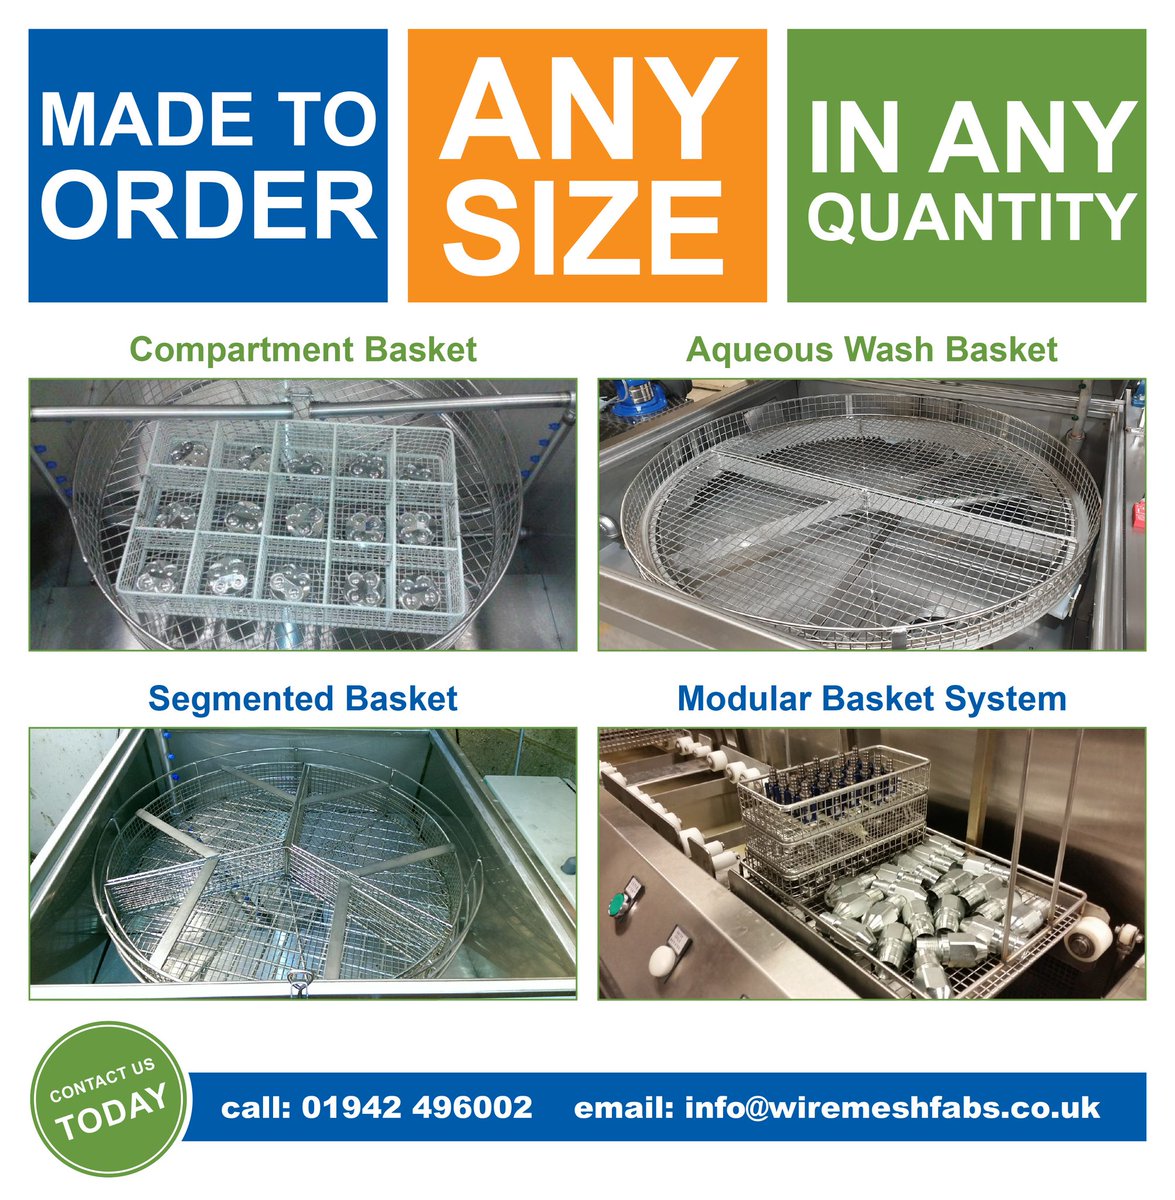 Made to order, in any size, in any quantity!

Contact us to discuss your project, request a quote or place an order.

🌐 wiremeshfabs.co.uk
☎️ 01942 314008
📧 info@wiremeshfabs.co.uk

#weldedmesh #wiremesh #madetoorder #custommade #custombuilt #madeinbritain #madeintheuk